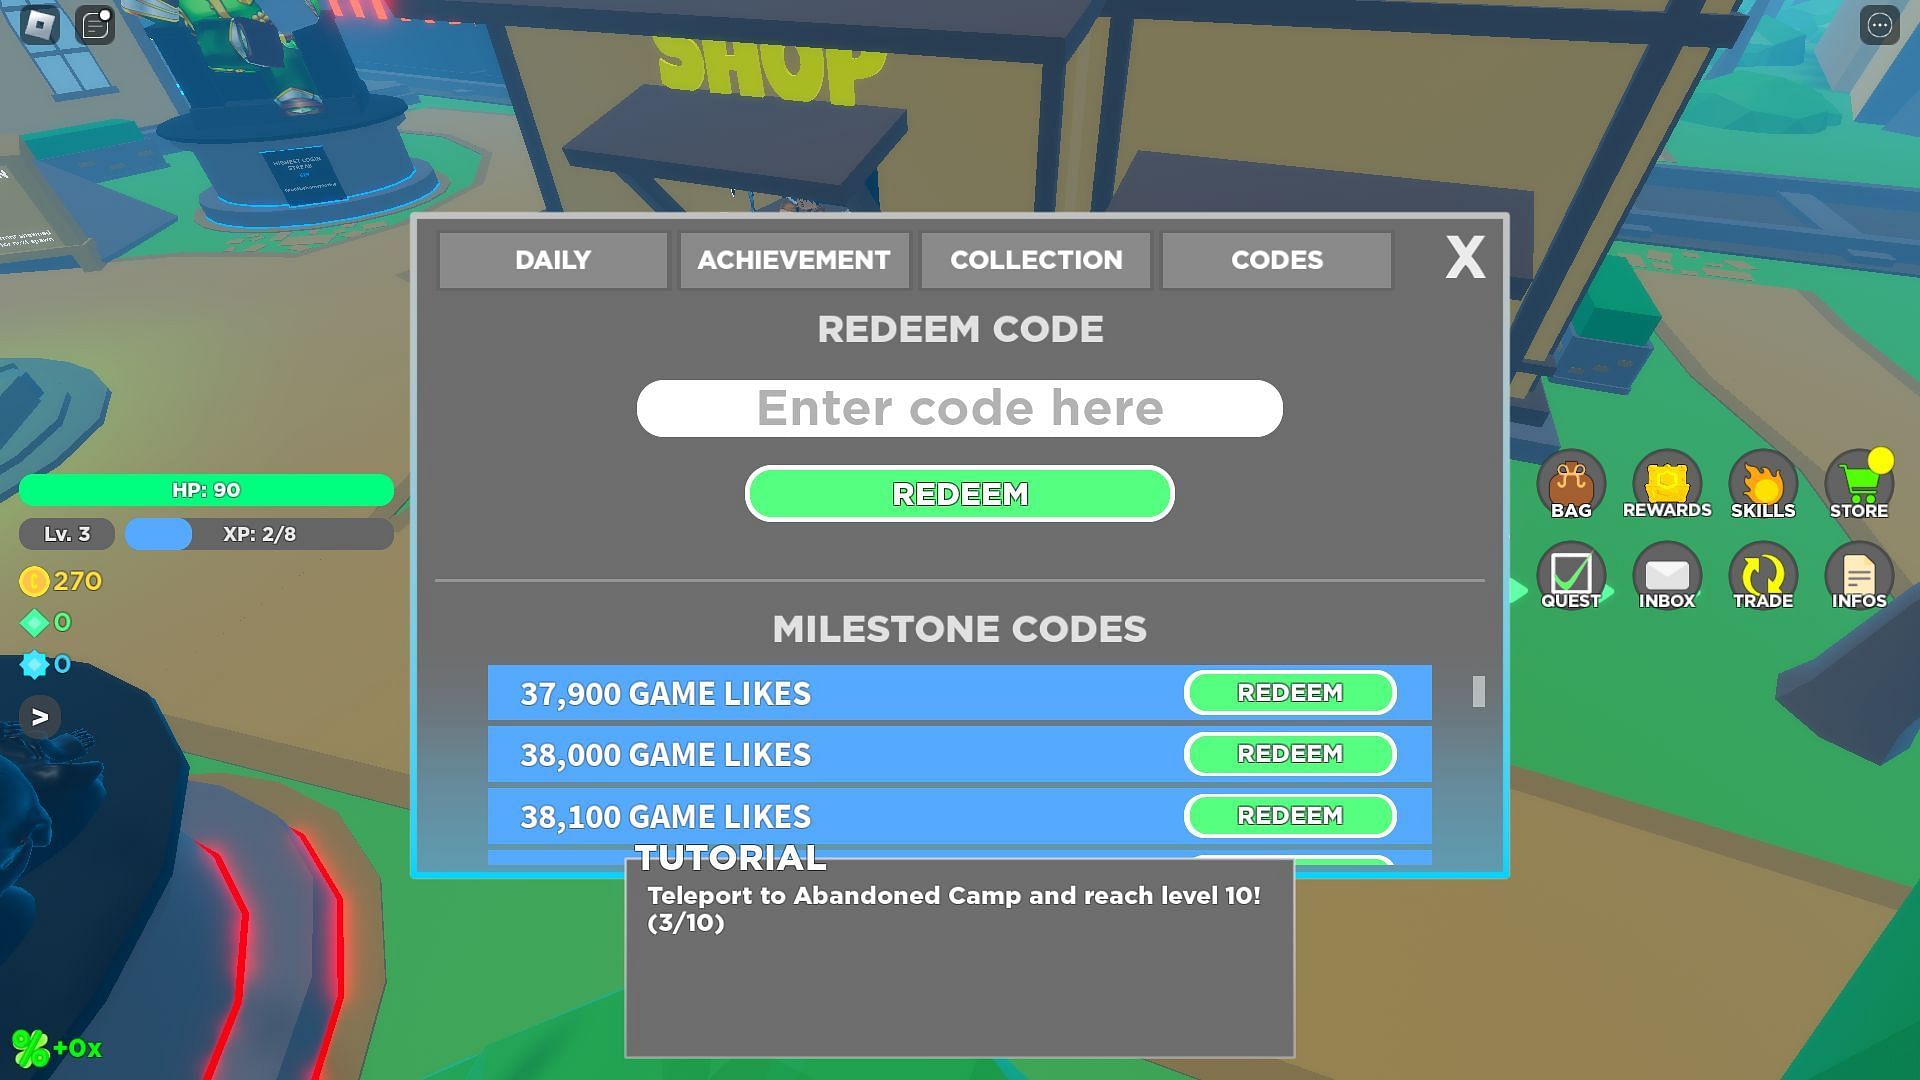 Active codes for RPG Champions (Image via Roblox)